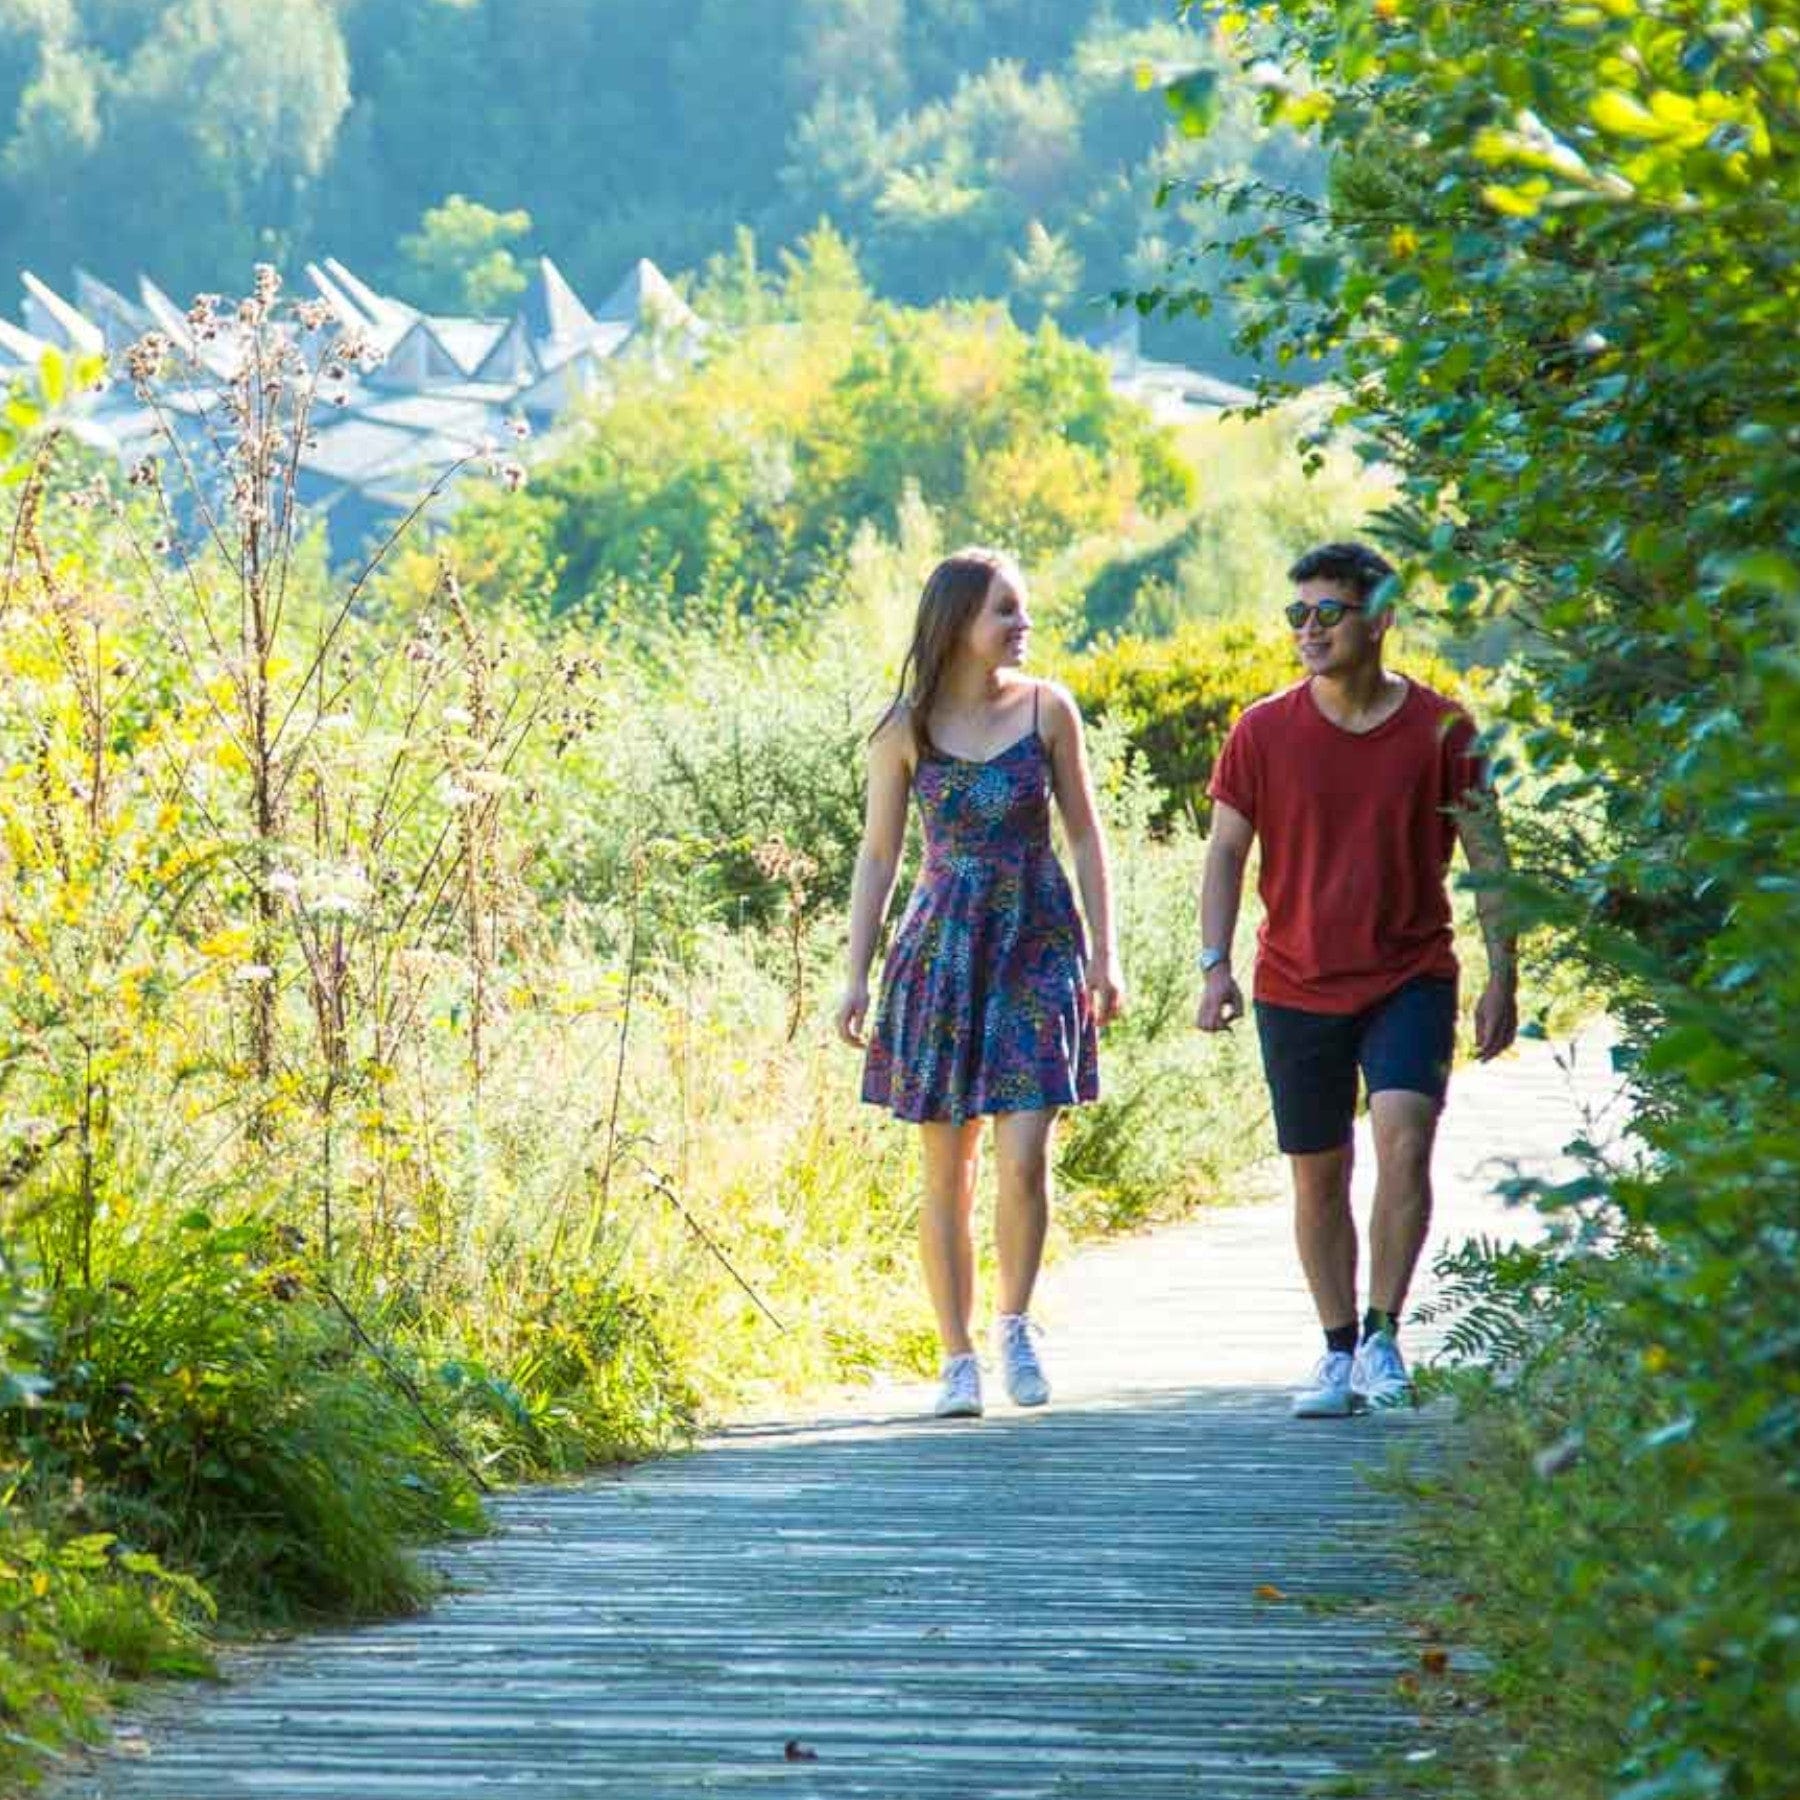 Young couple walking and talking on a wooden boardwalk amidst lush greenery on a sunny day.